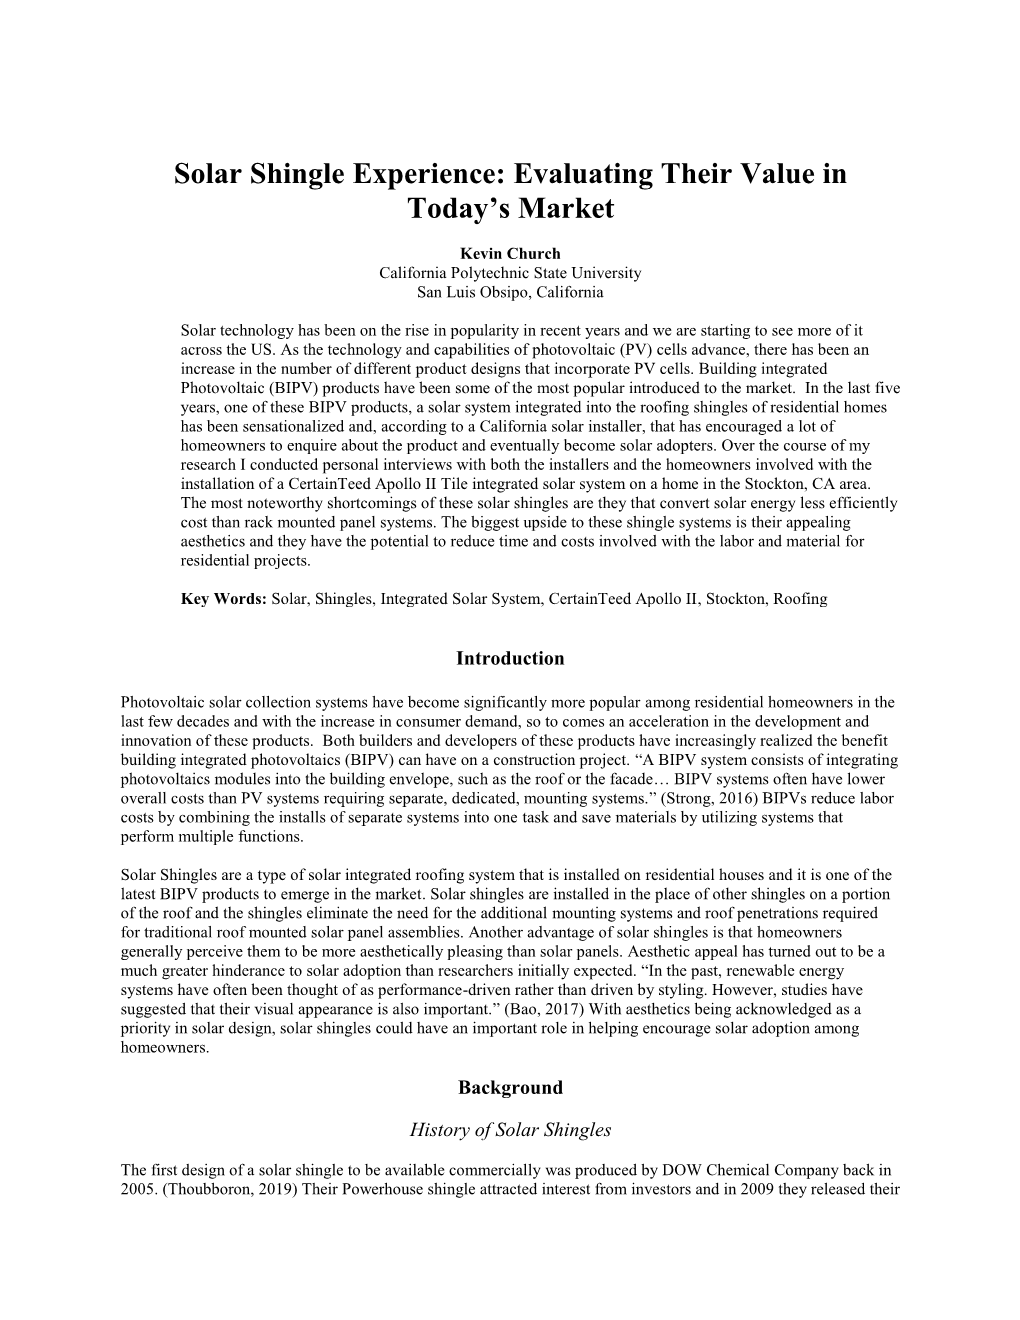 Solar Shingle Experience: Evaluating Their Value in Today’S Market